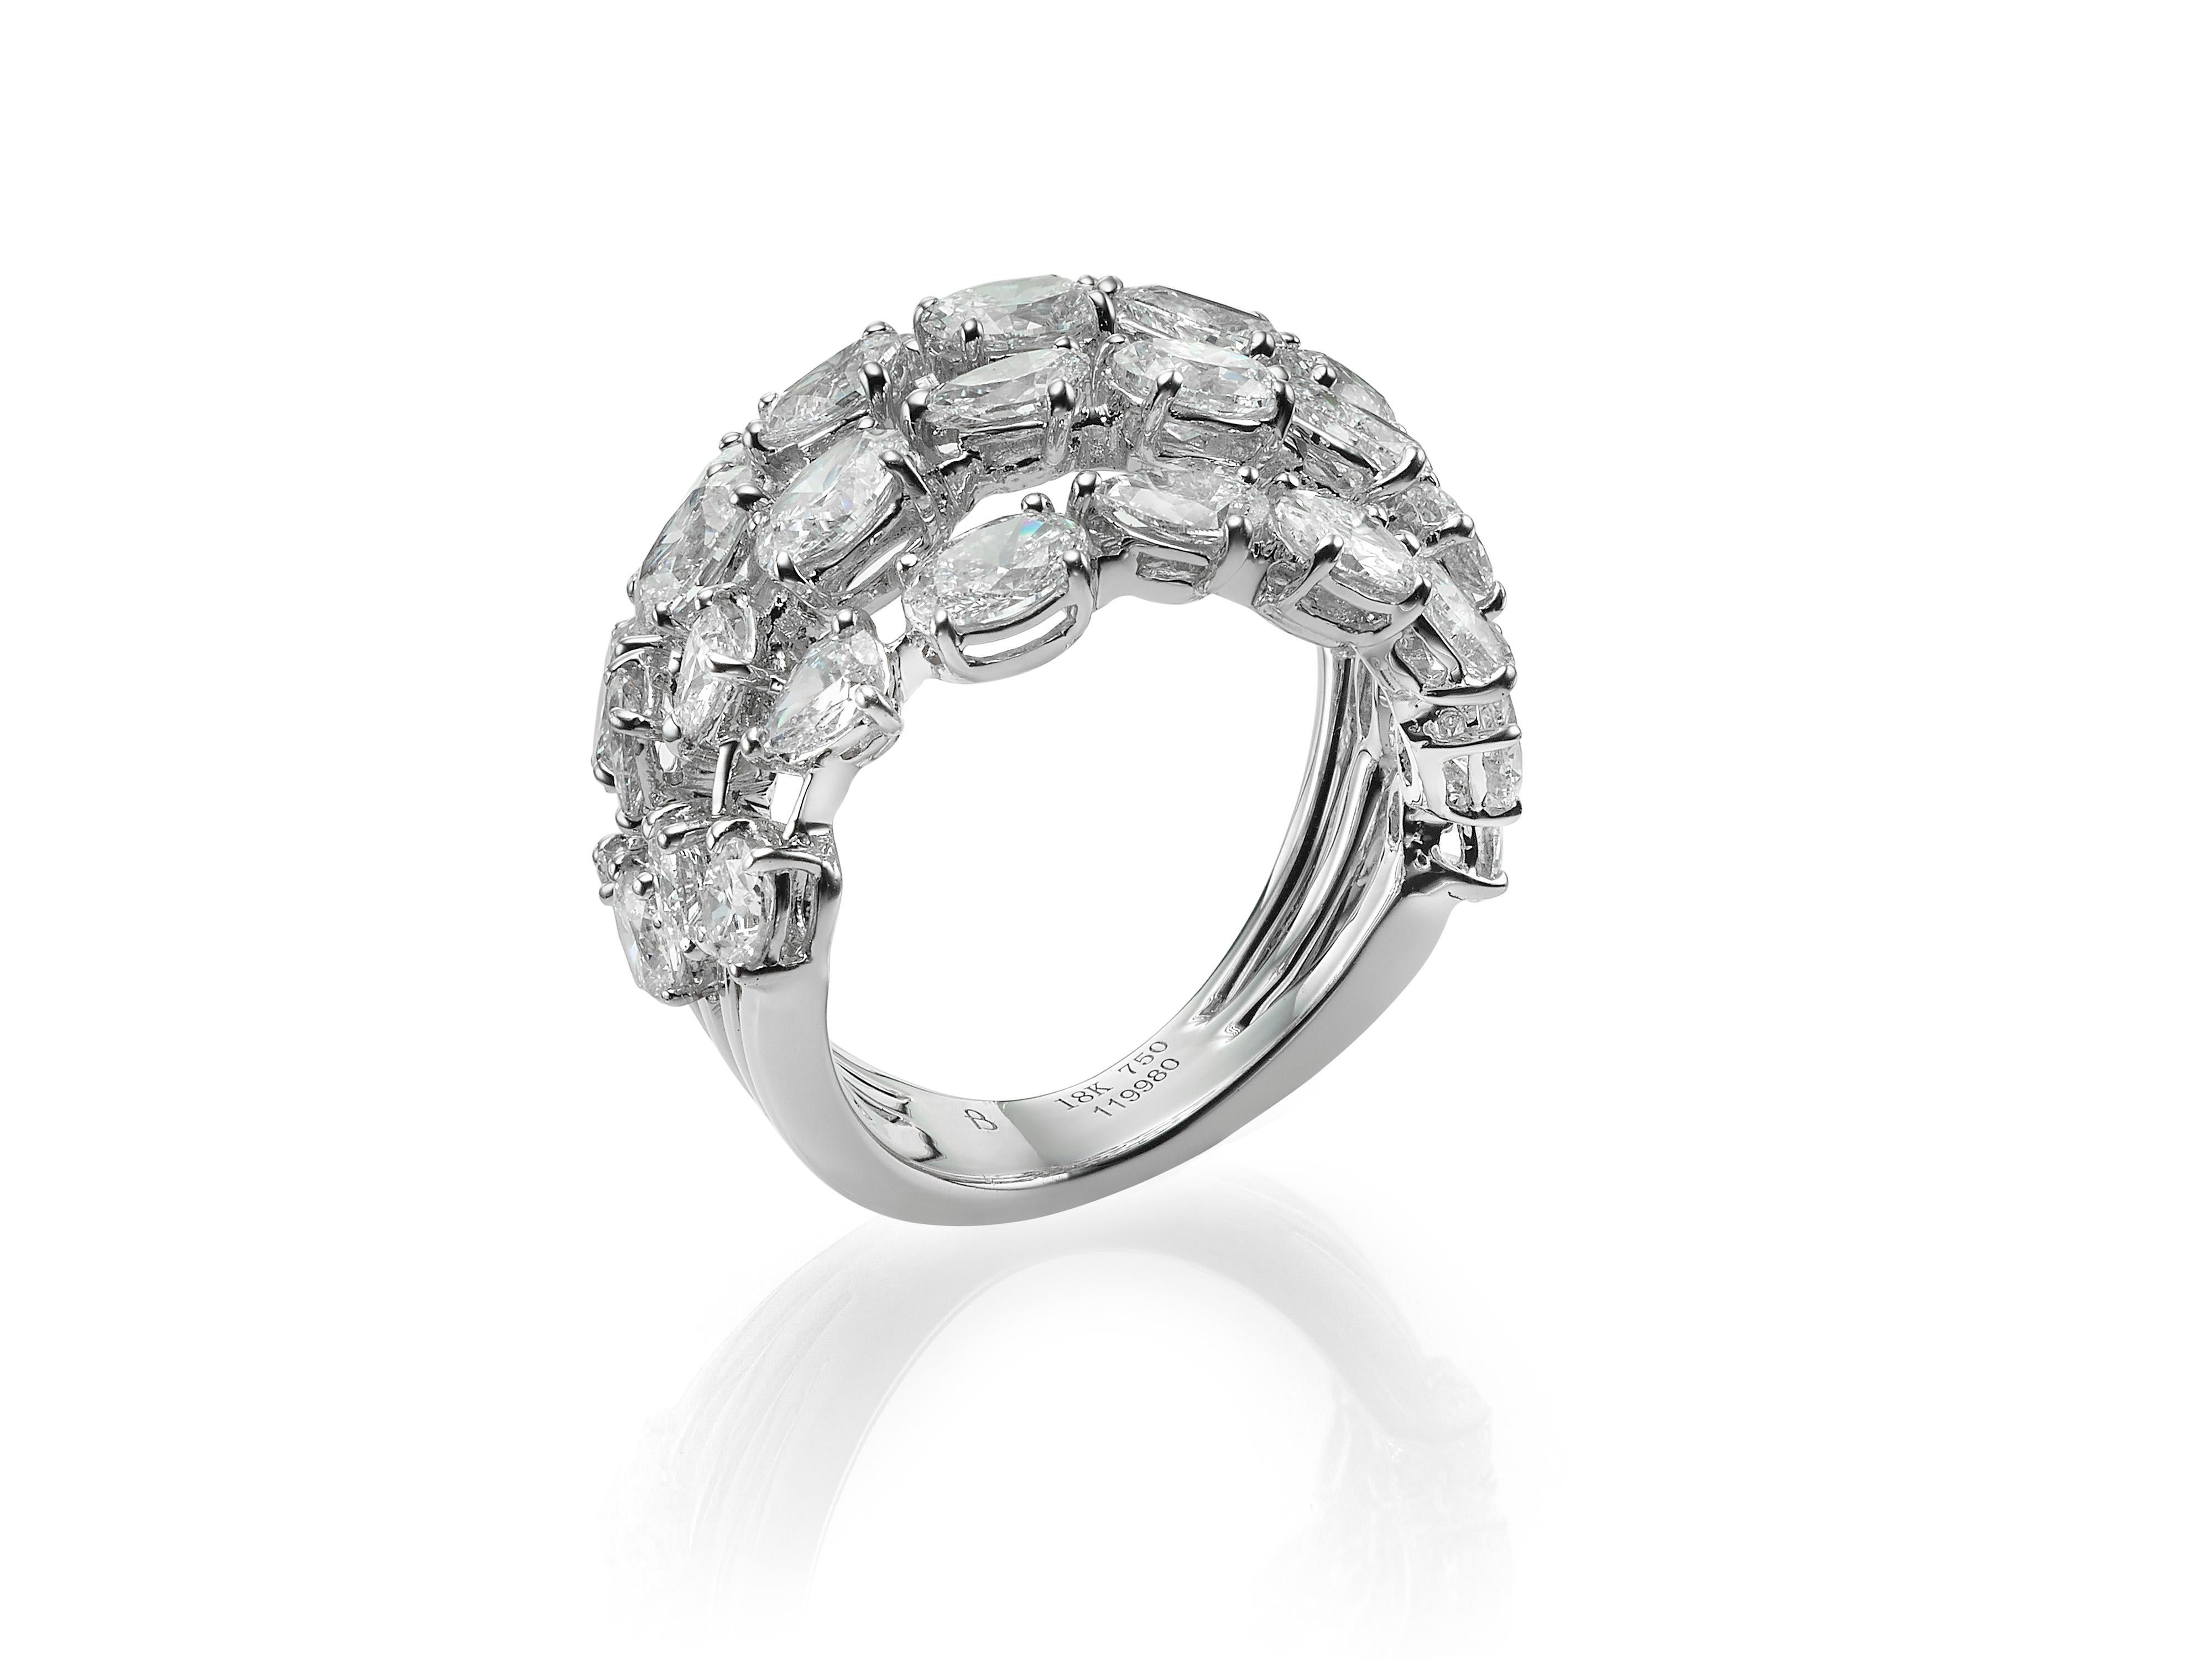 Handcrafted from 18K white gold, Butani's diamond bombe cocktail ring features four lines of alternating oval-cut and pear-cut white diamonds totaling 6.06 carats.  Currently a ring size US 7.  For other sizes, please contact seller.

Composition: